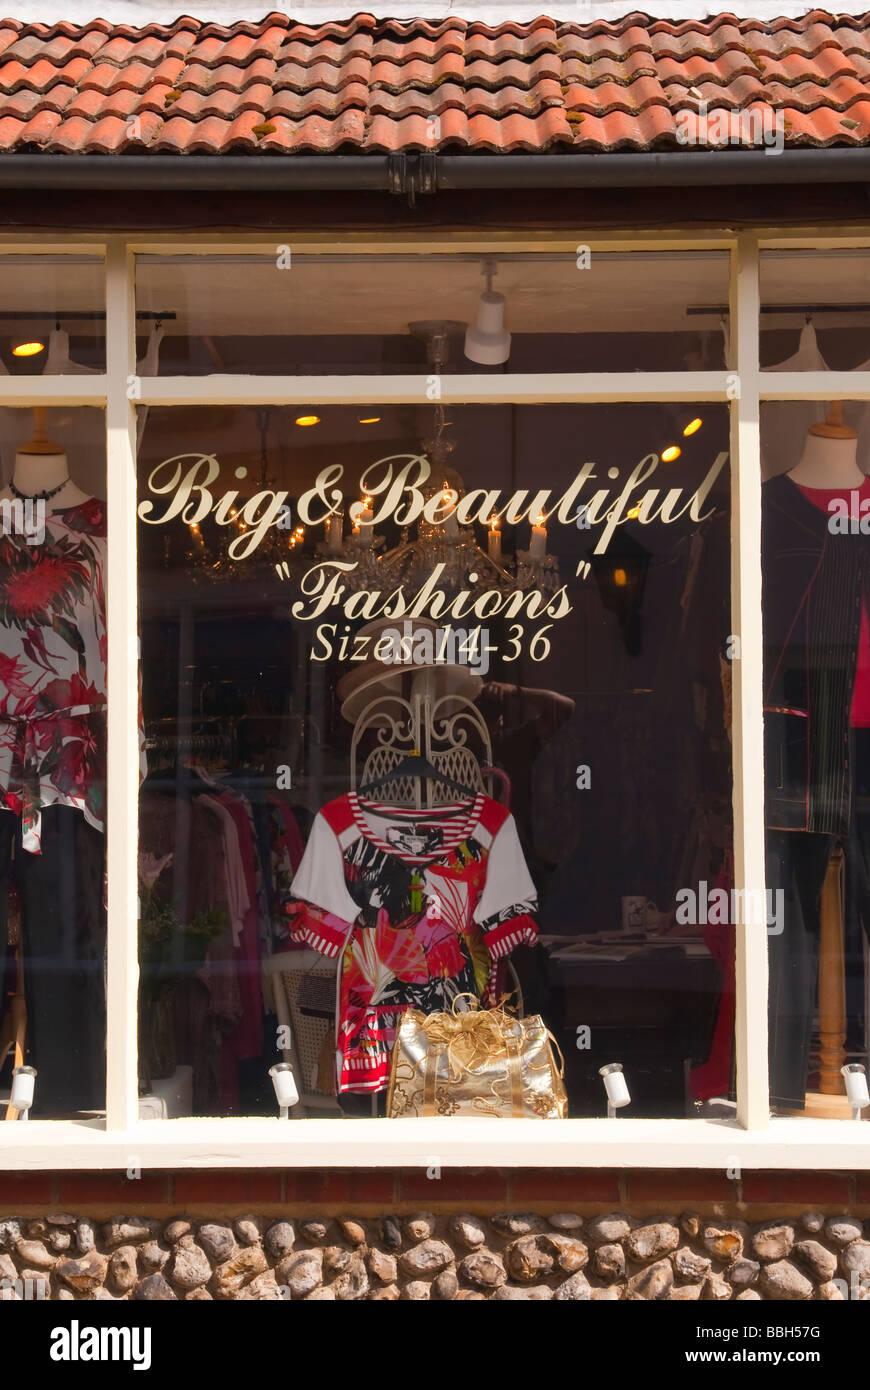 A clothing shop store called big & beautiful selling clothes and fashions catering for women who are big sizes in Holt in the Uk Stock Photo